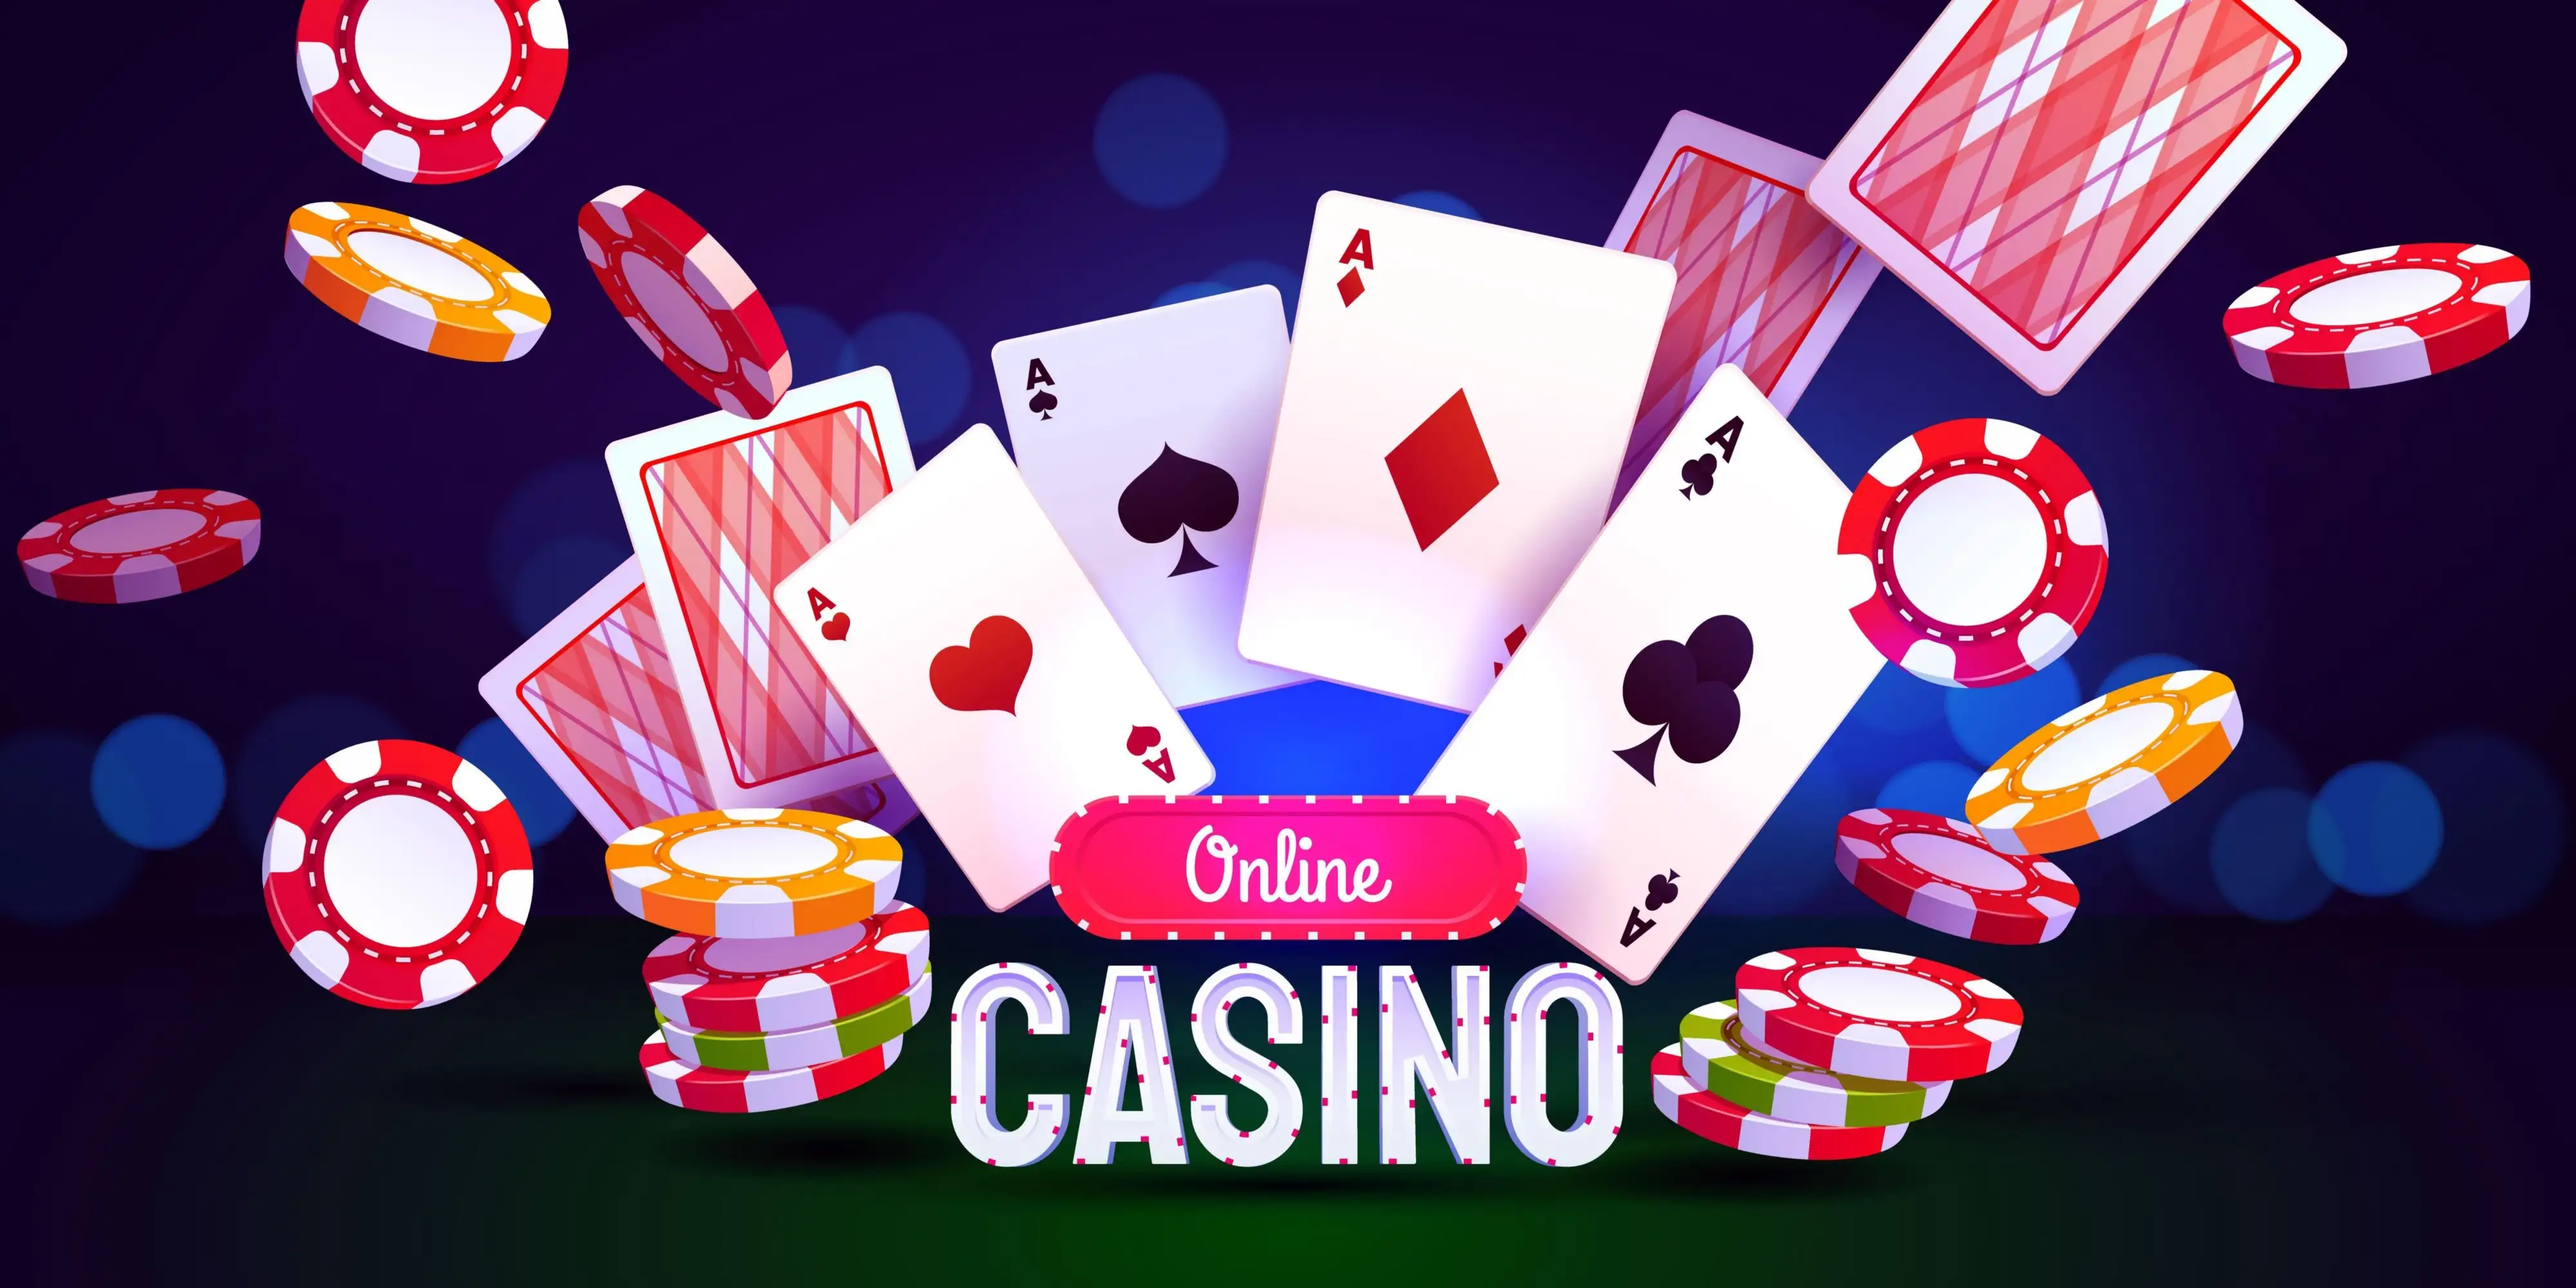 The first things to consider when choosing an online casino are simple